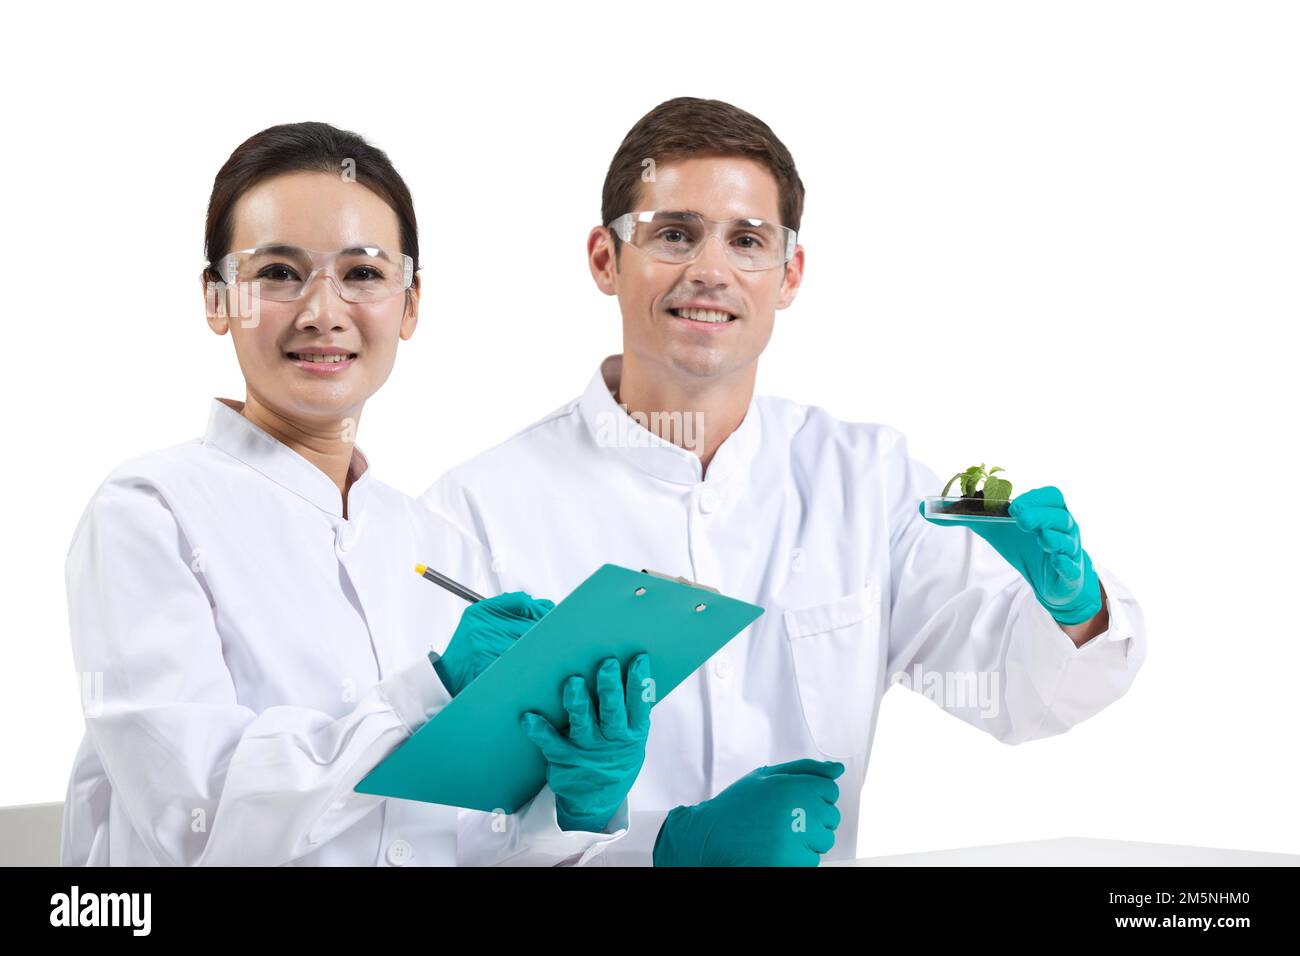 Scientists study of plant are discussed Stock Photo